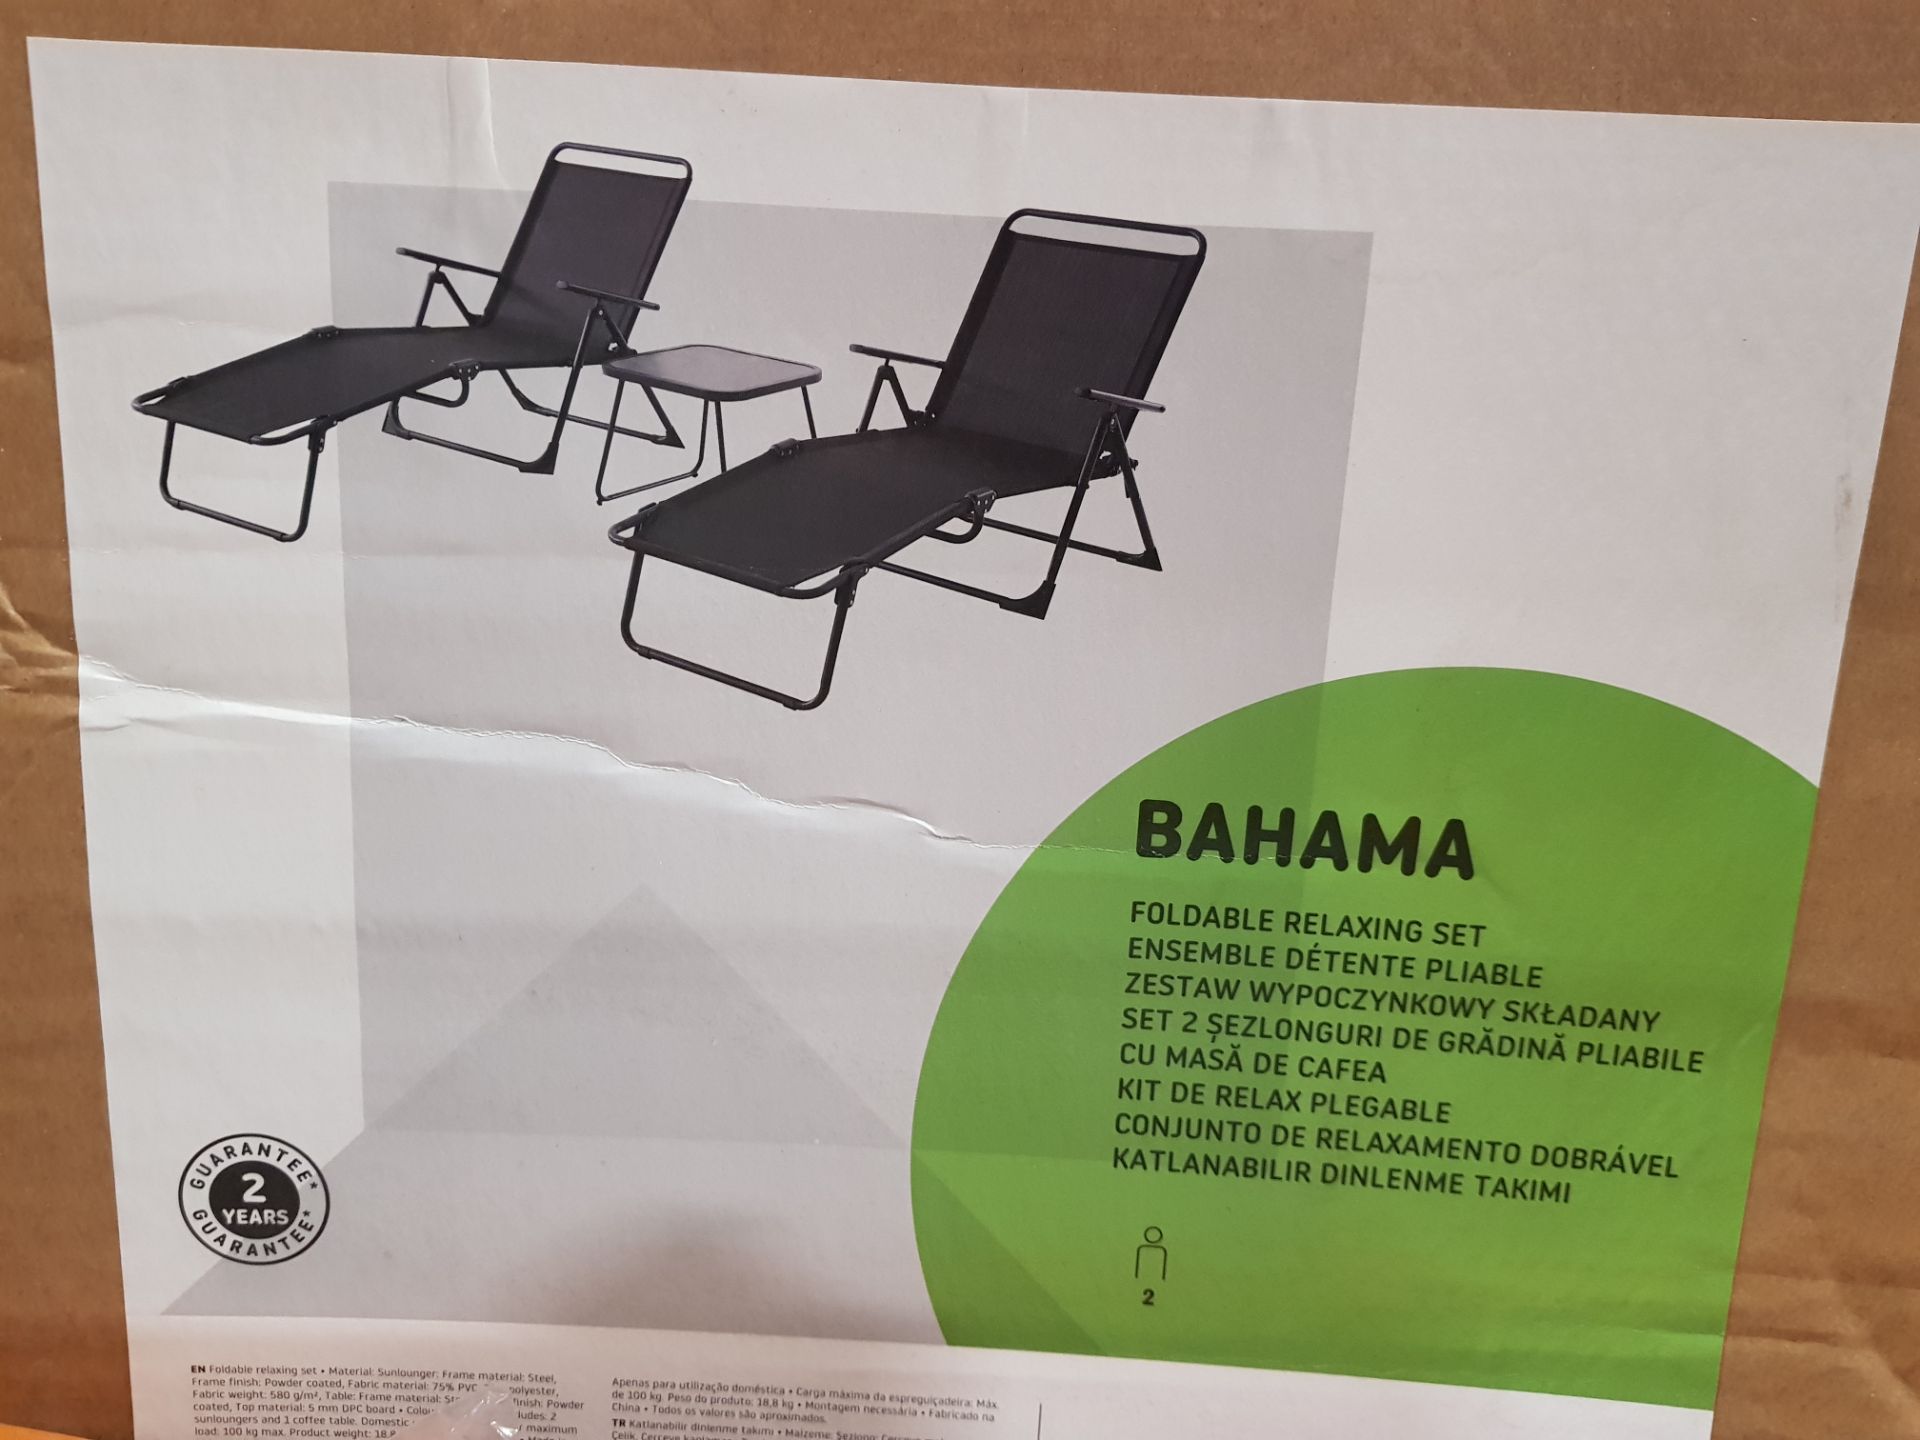 1 X BRAND NEW BAHAMA 2 SEATER FOLDABLE SUNLOUNGER AND COFFEE TABLE SET - IN BLACK COLOUR - IN 1 BOX - Image 2 of 2